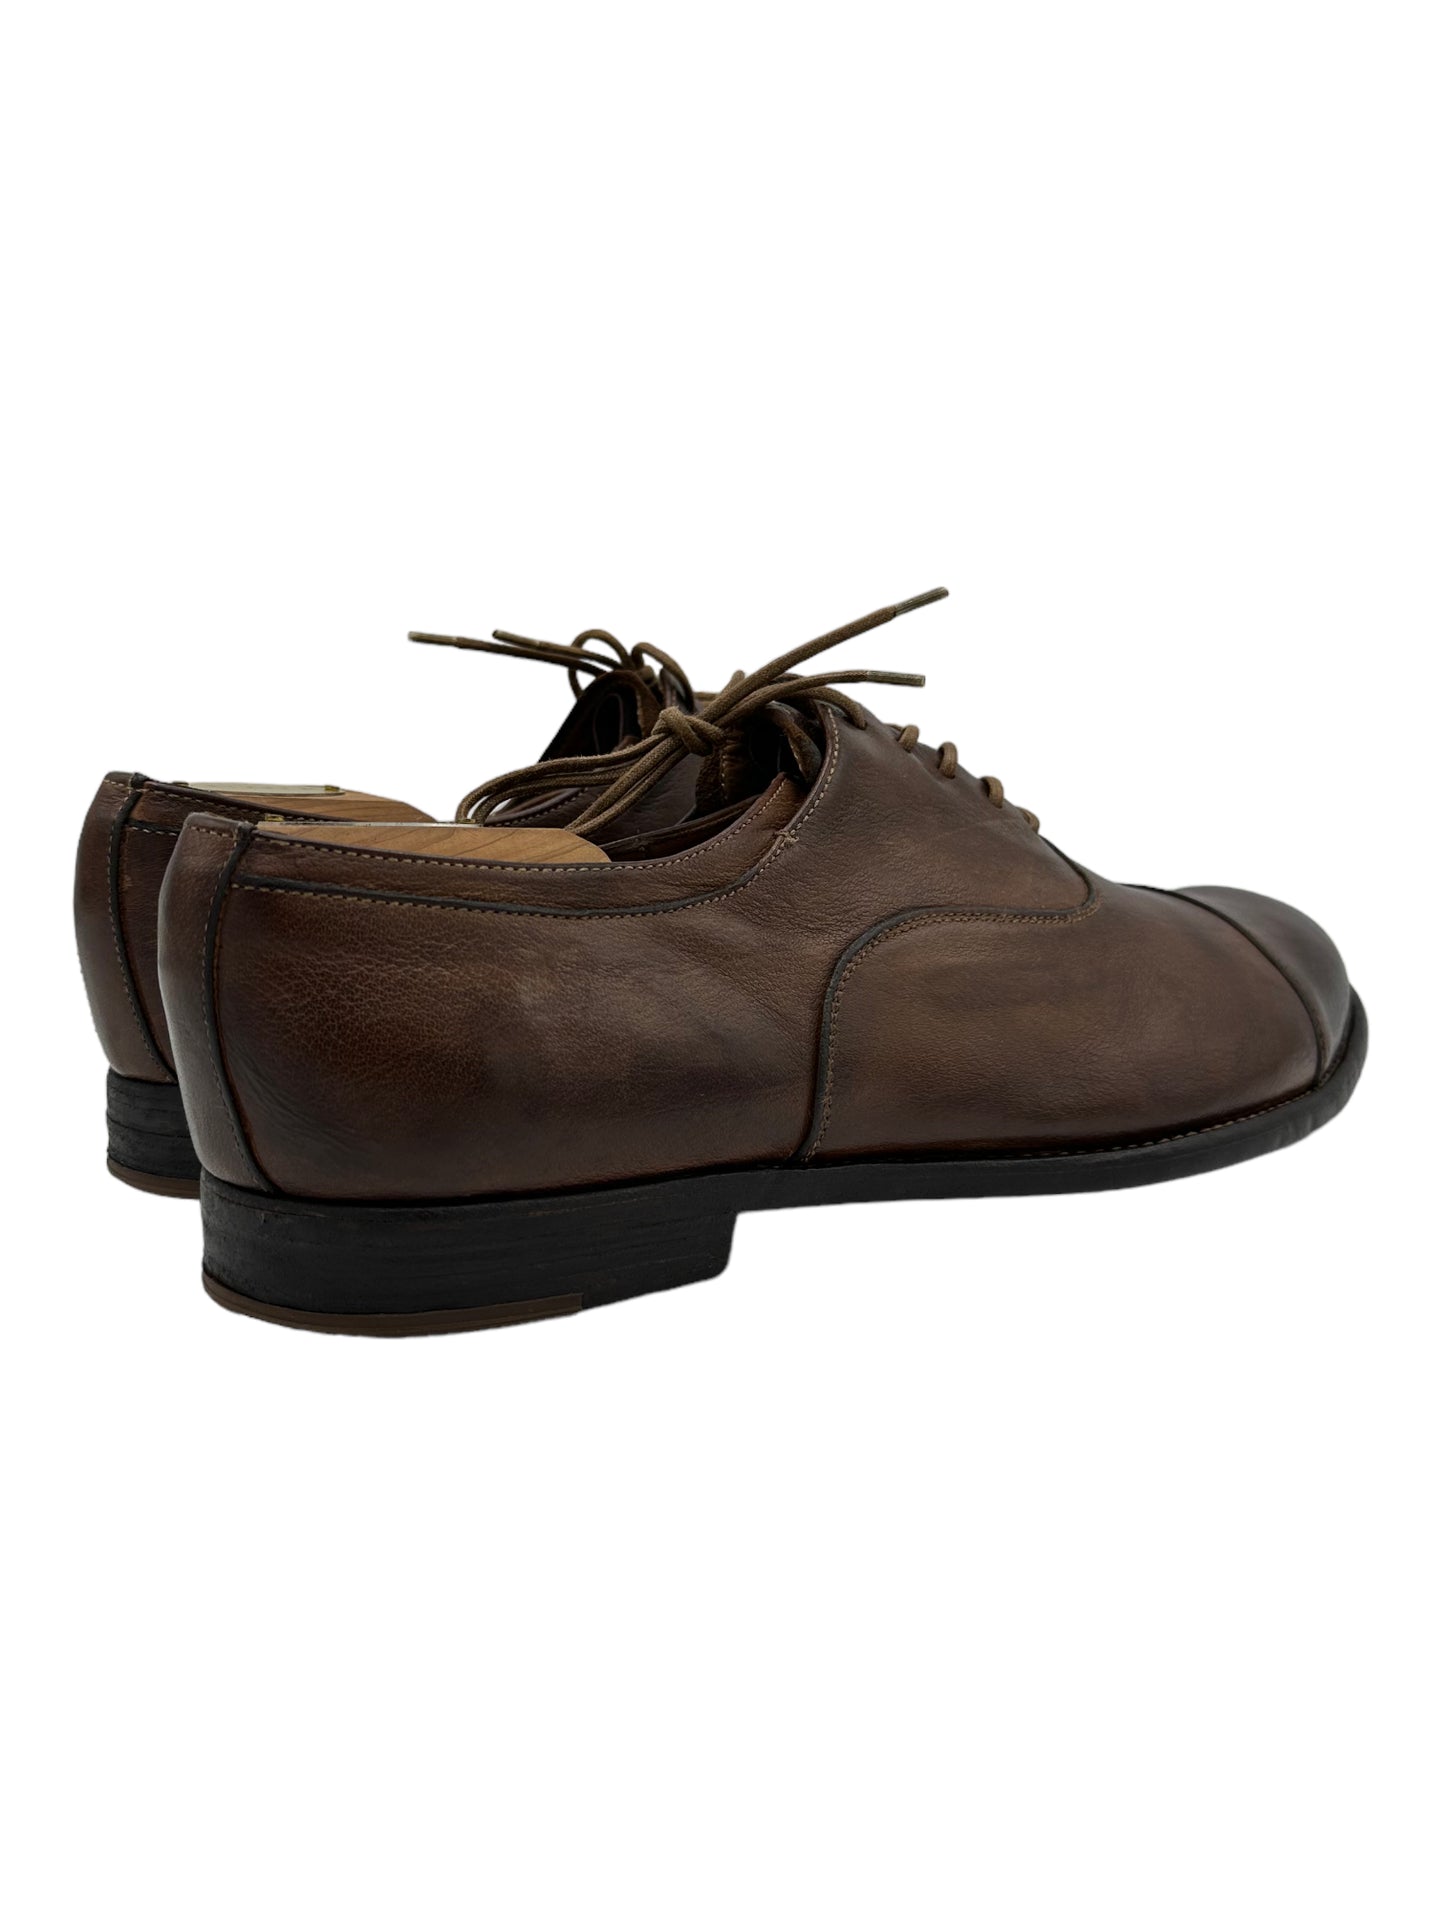 Officine Creative Brown Leather Oxford Shoes